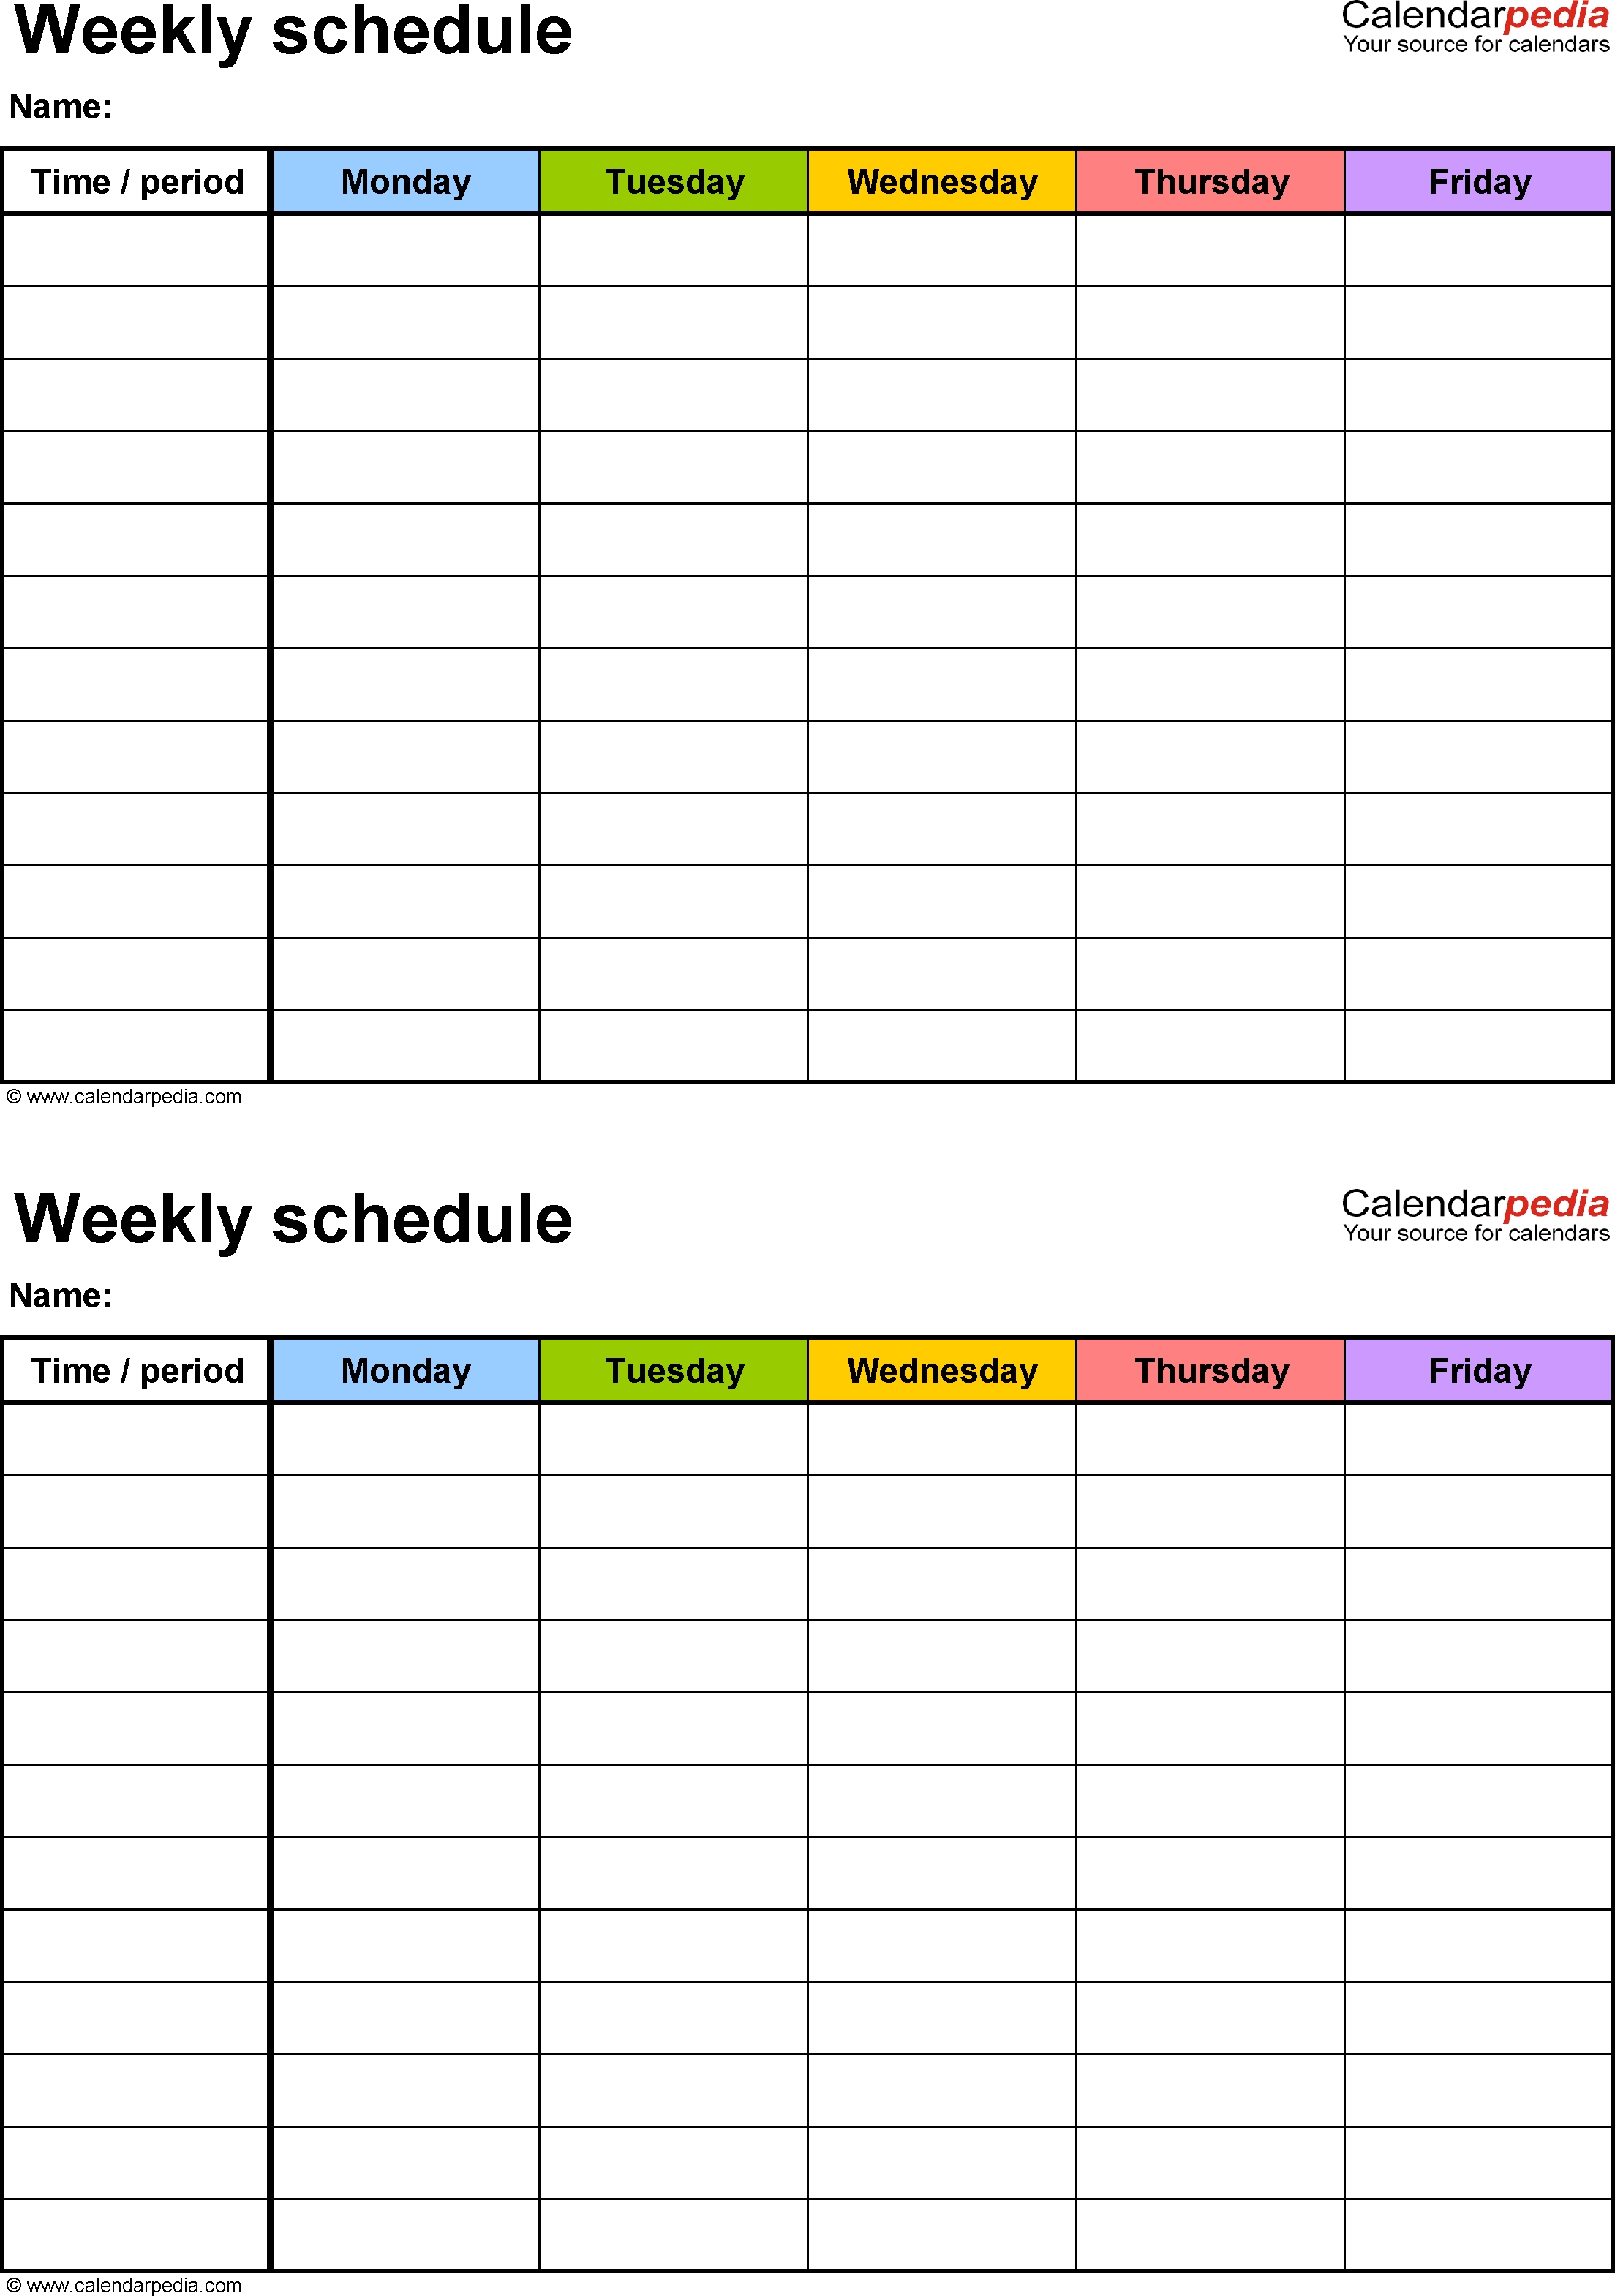 Free Weekly Schedule Templates For Word Editable Daily Template for Large Blank Editable Spider Plan Template